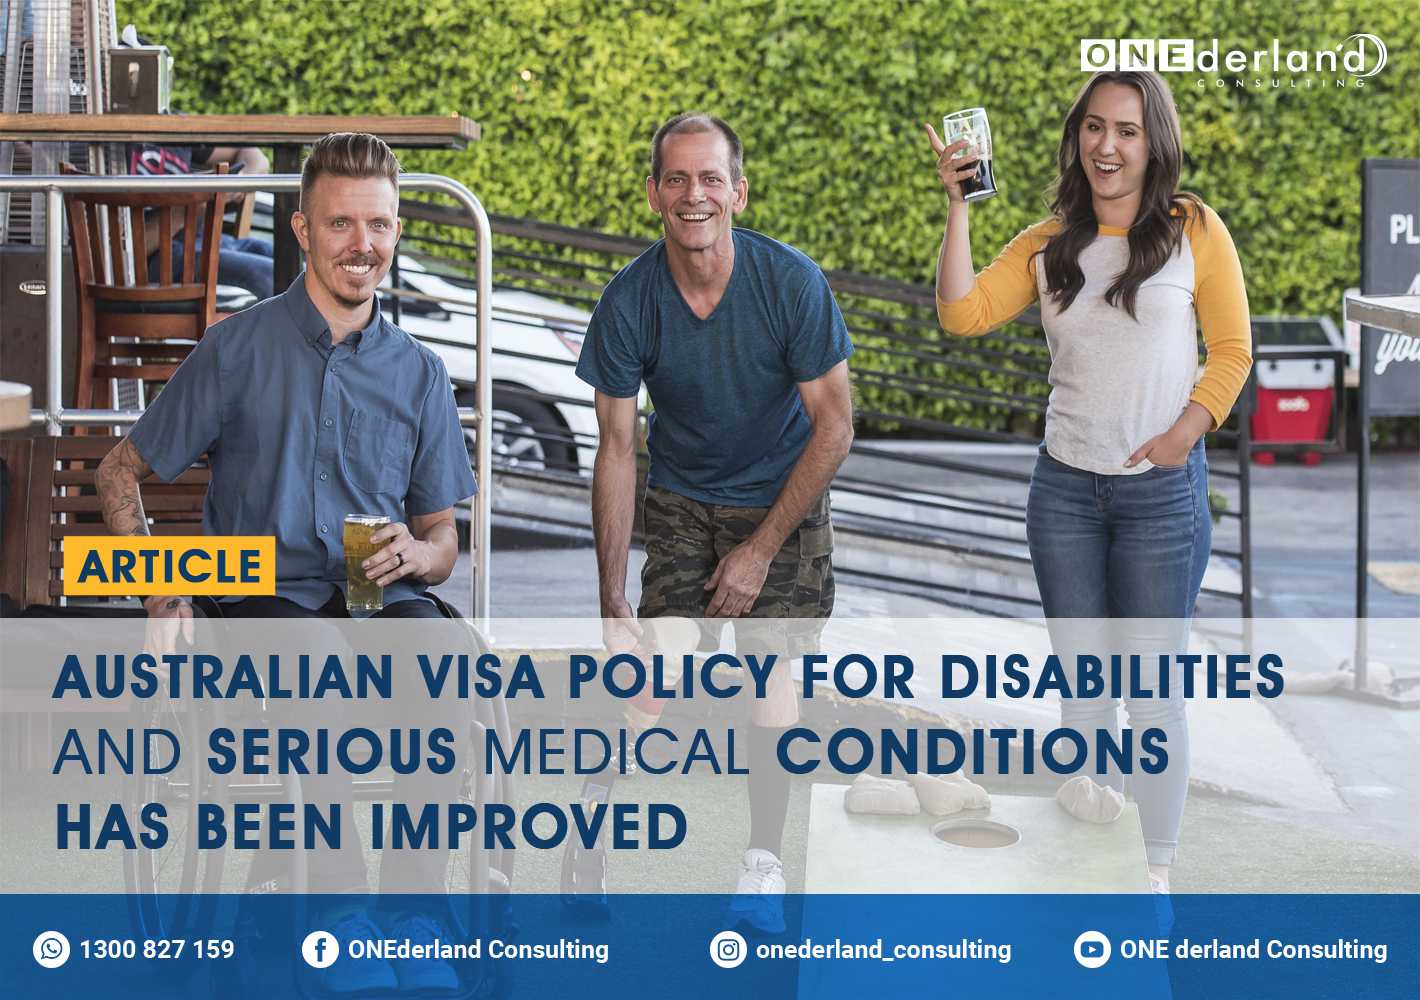 Australian Visa Policy for Disabilities and Serious Medical Conditions Has Been Improved